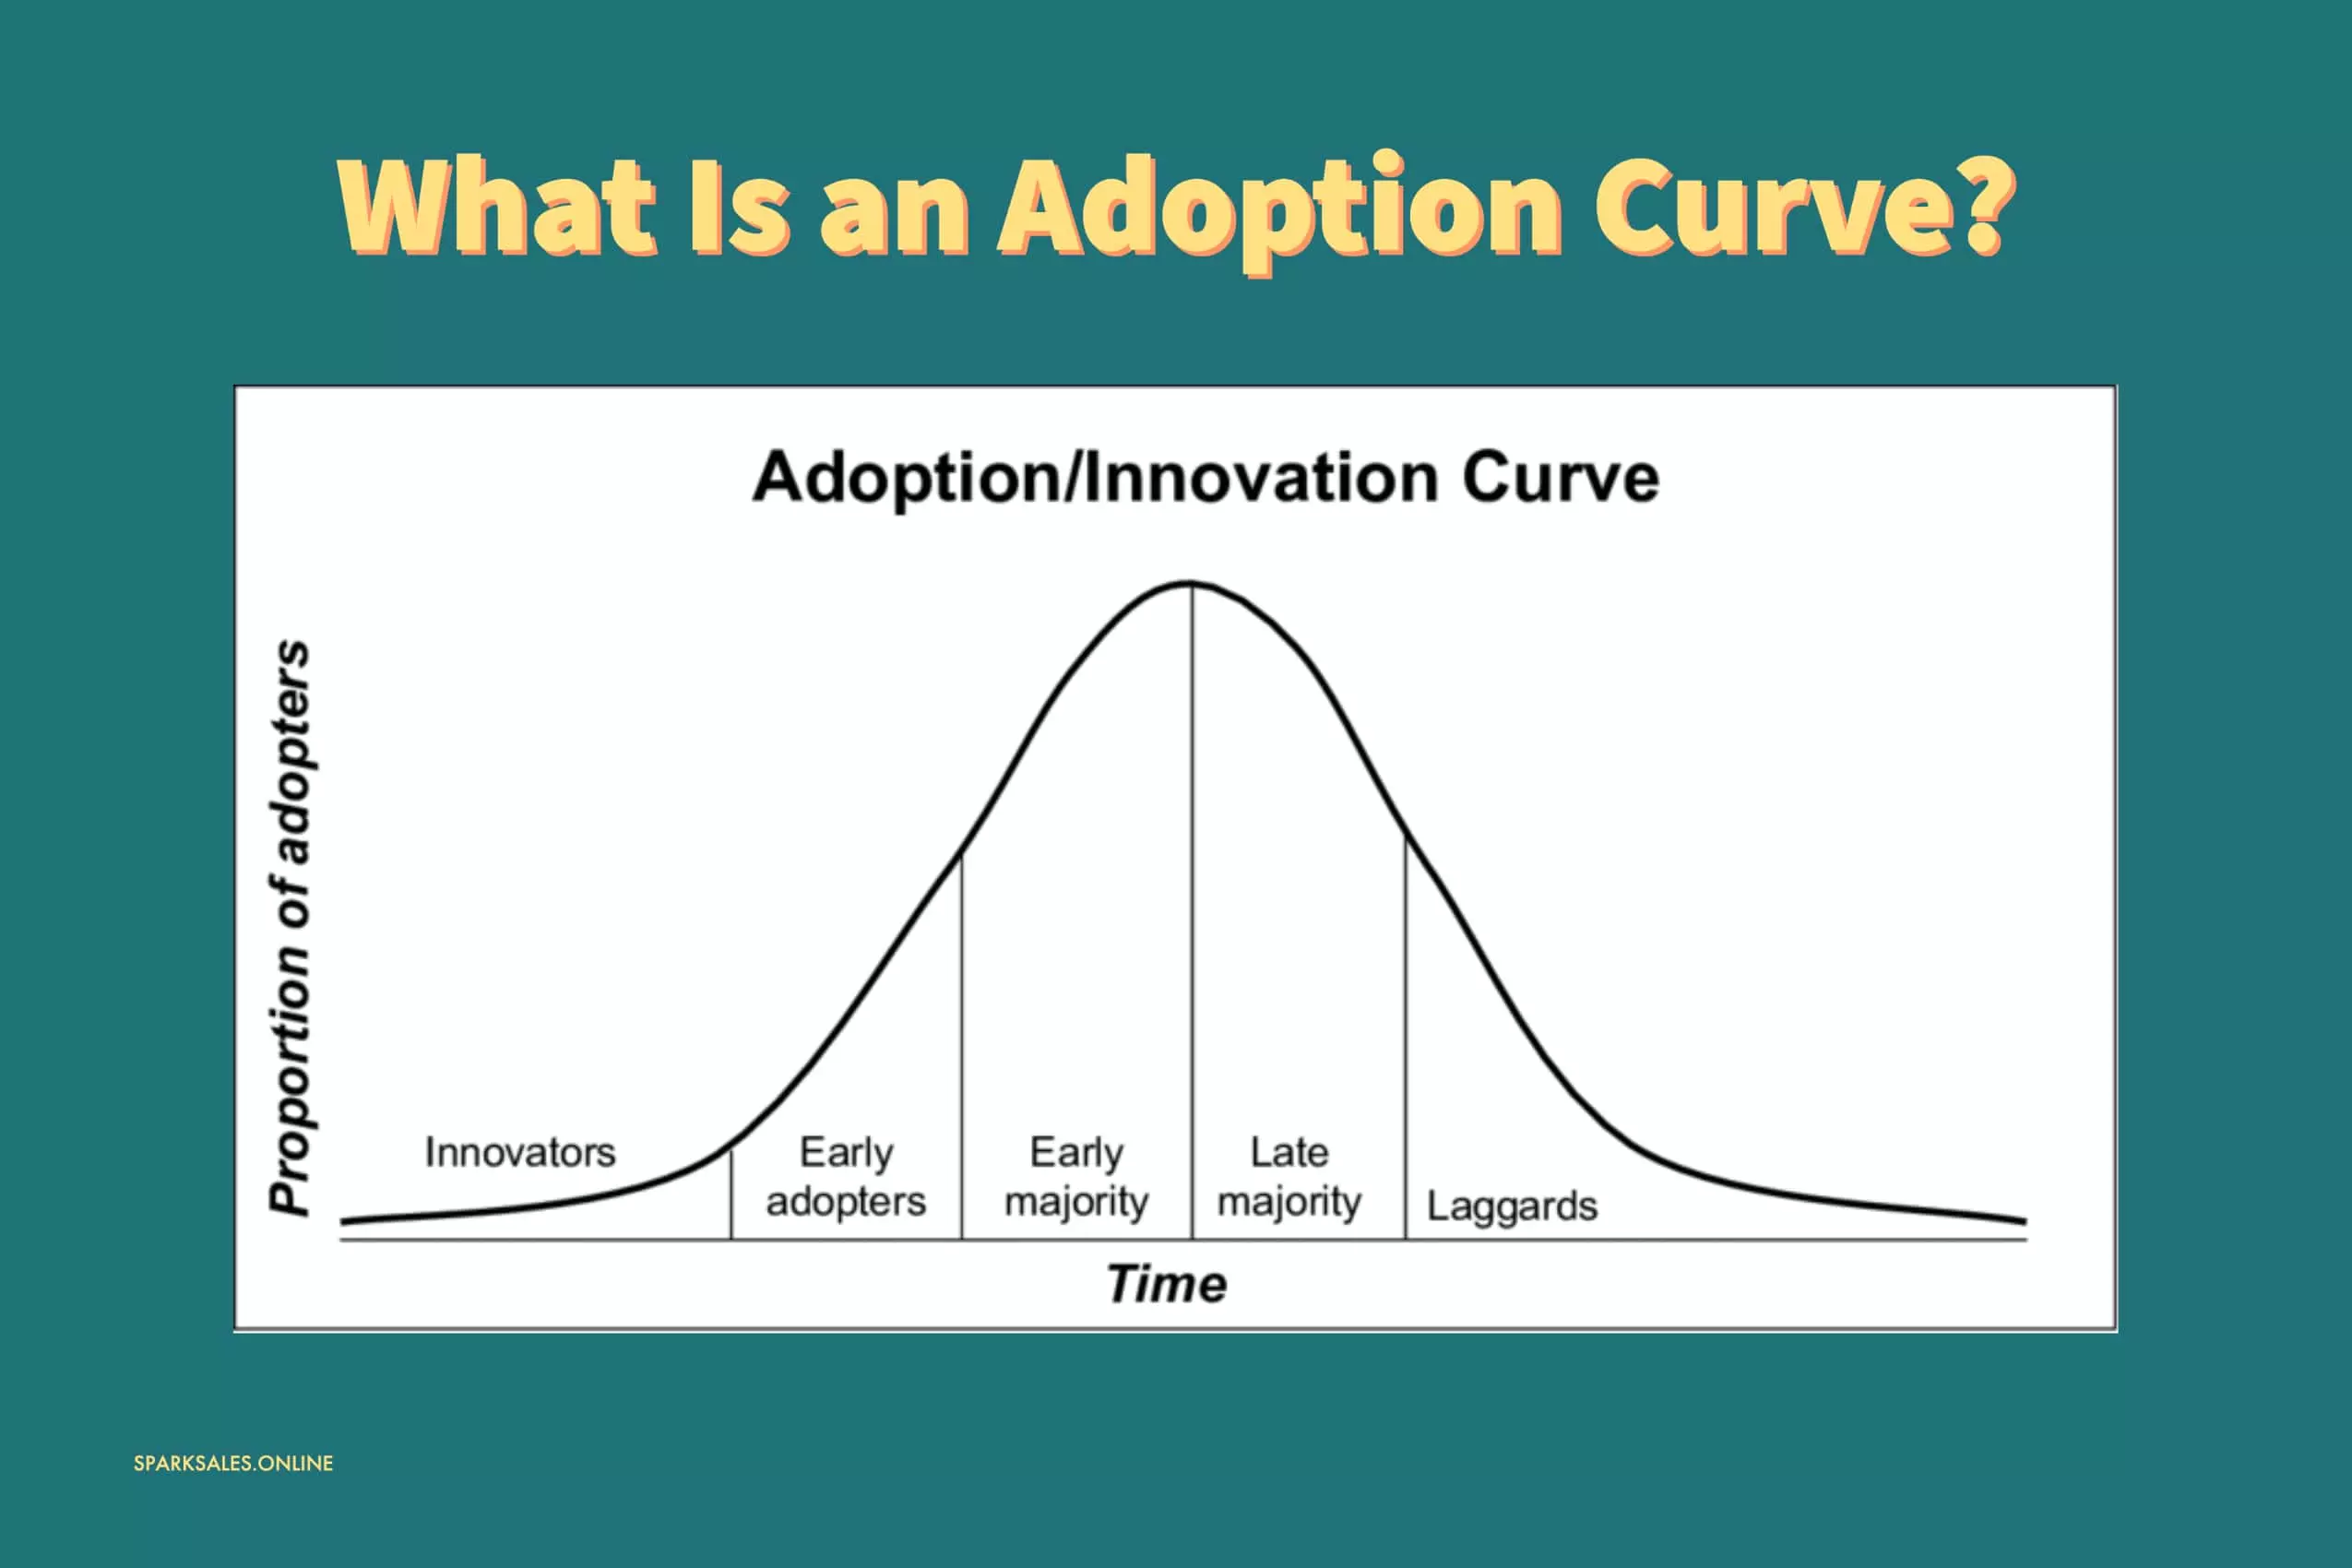 What Is an Adoption Curve?